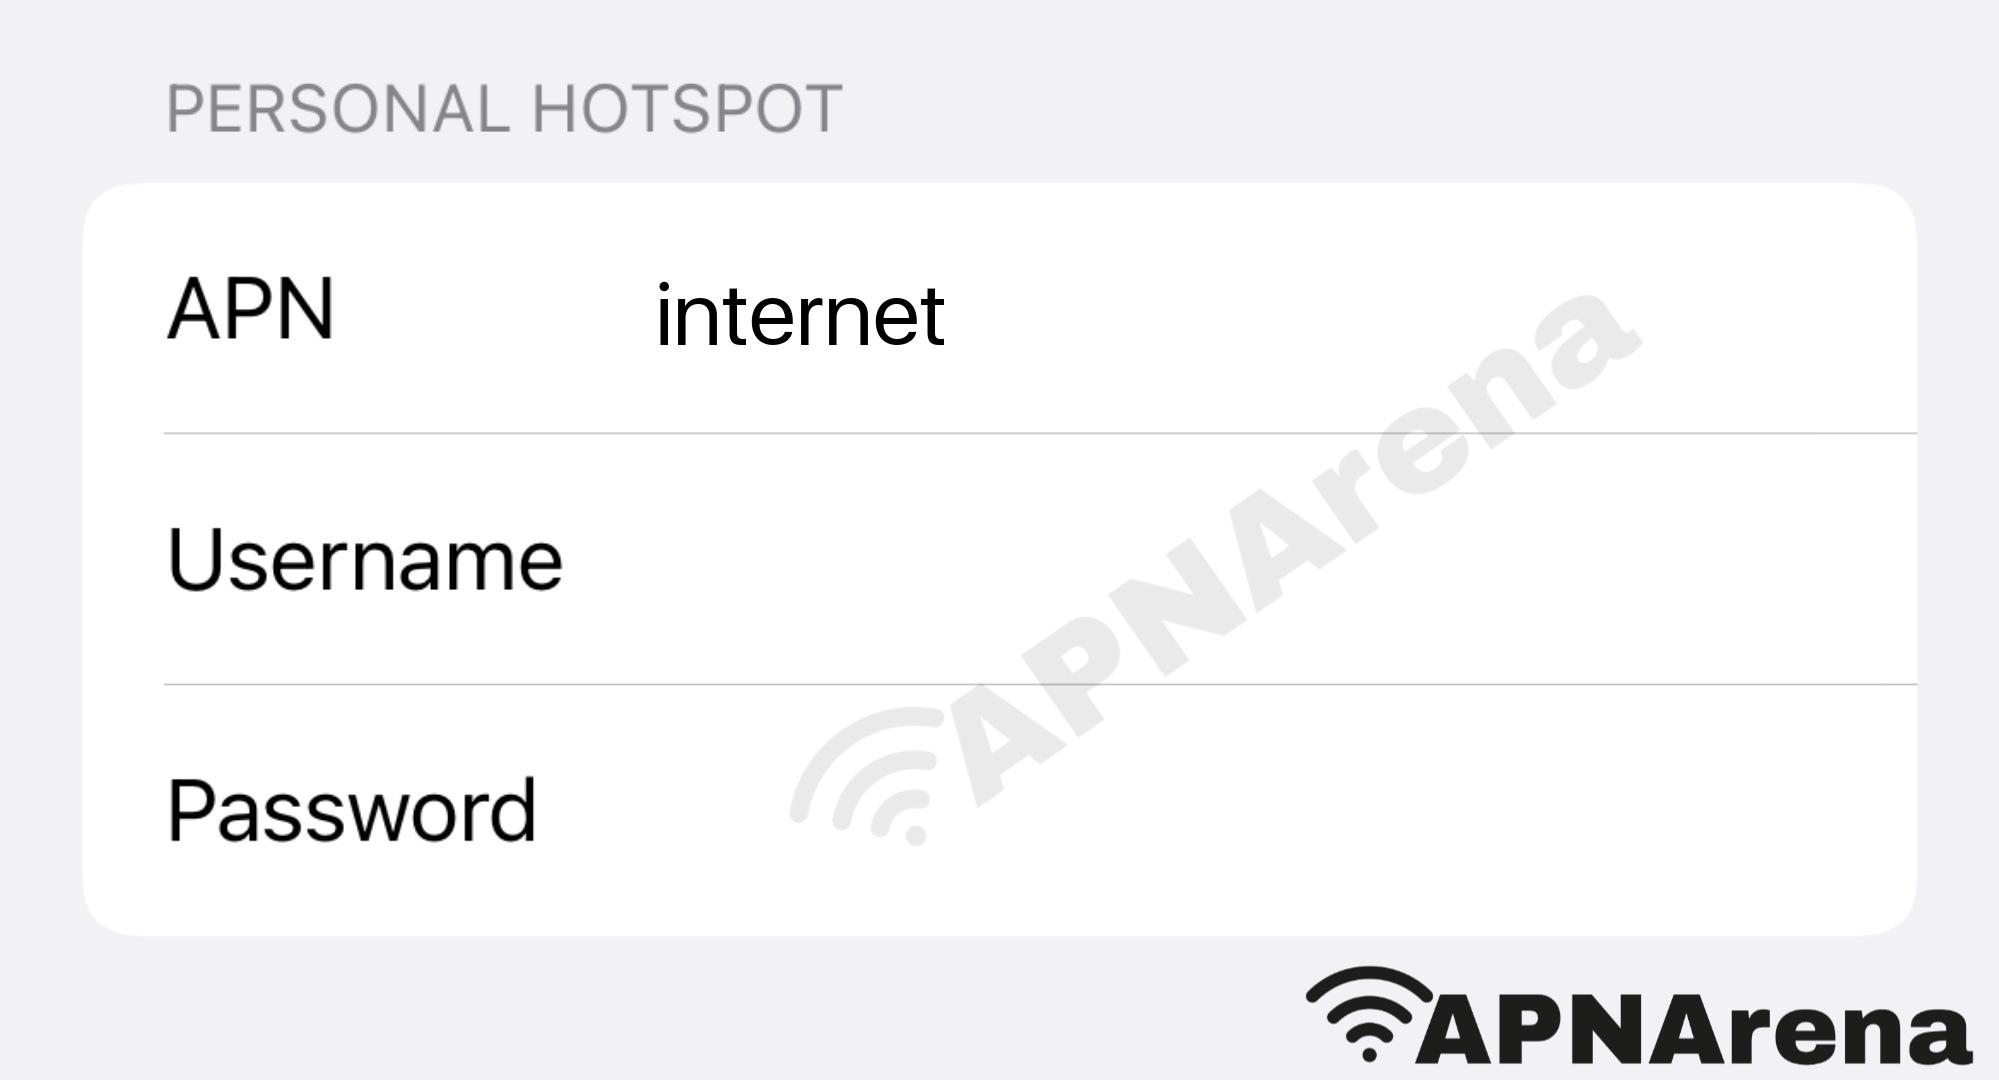 WOW Mobile PCS Personal Hotspot Settings for iPhone